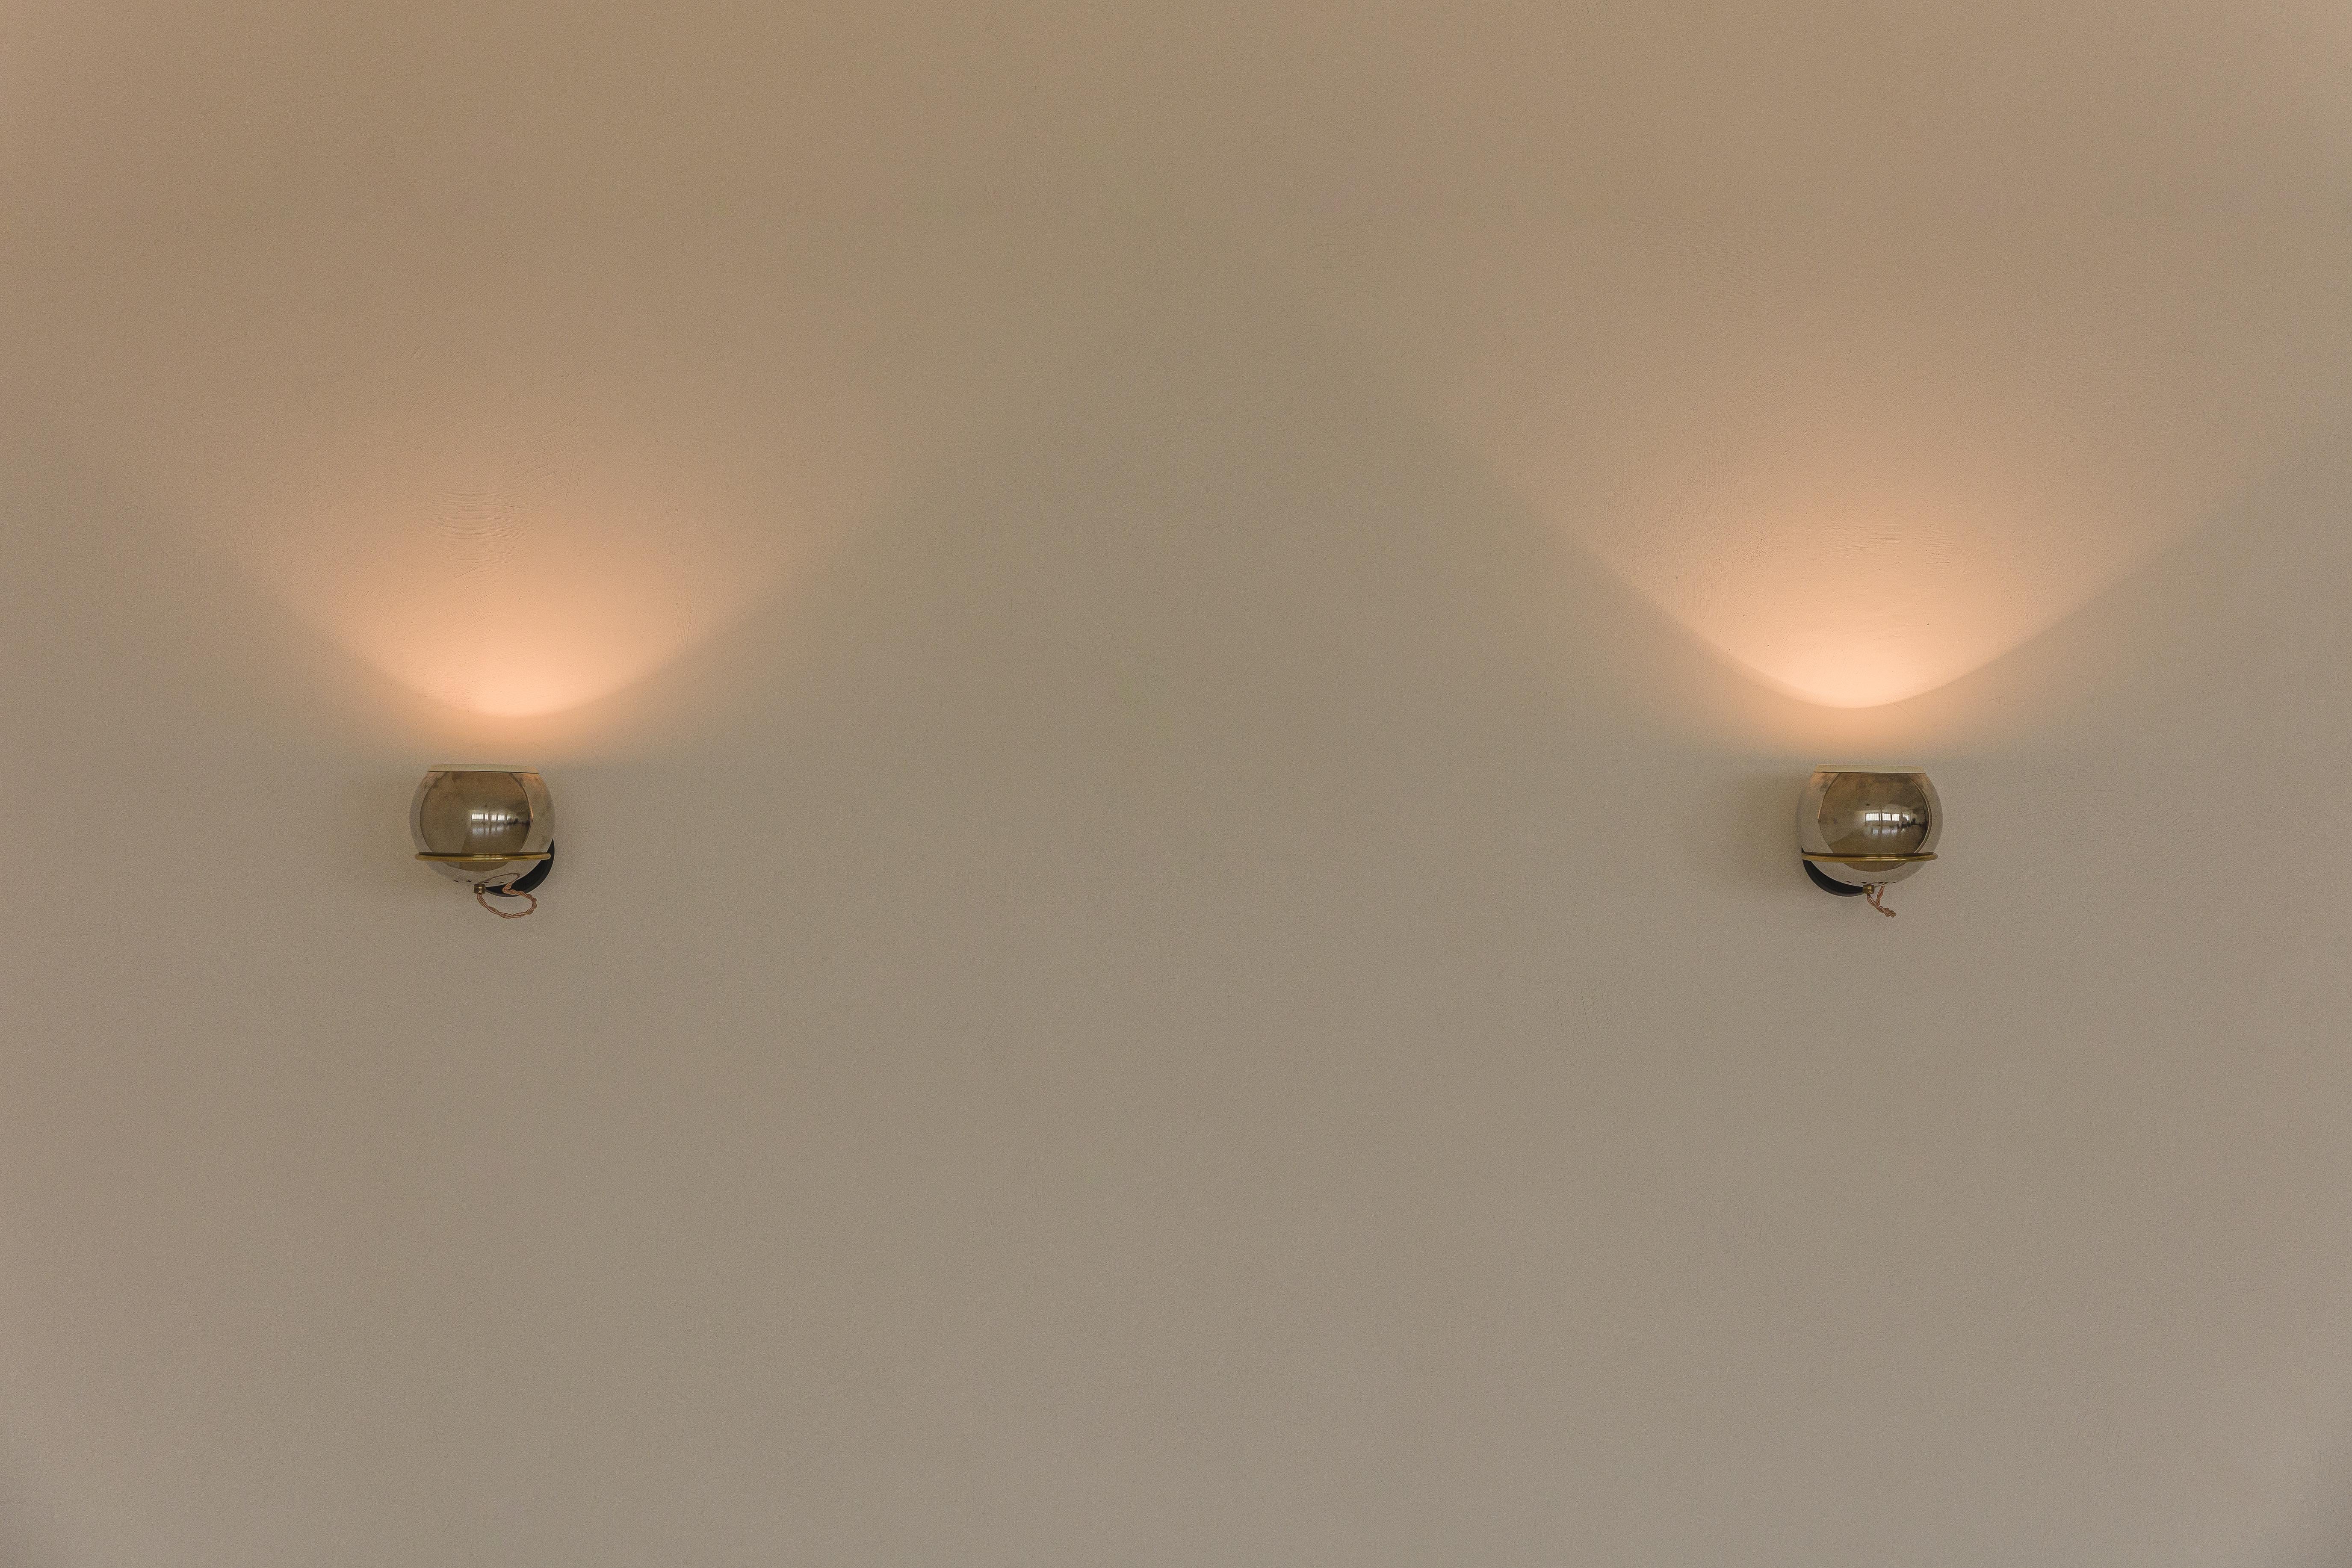 Previously Restored.
This wall lamps have flexible structures to adjust the light positions.